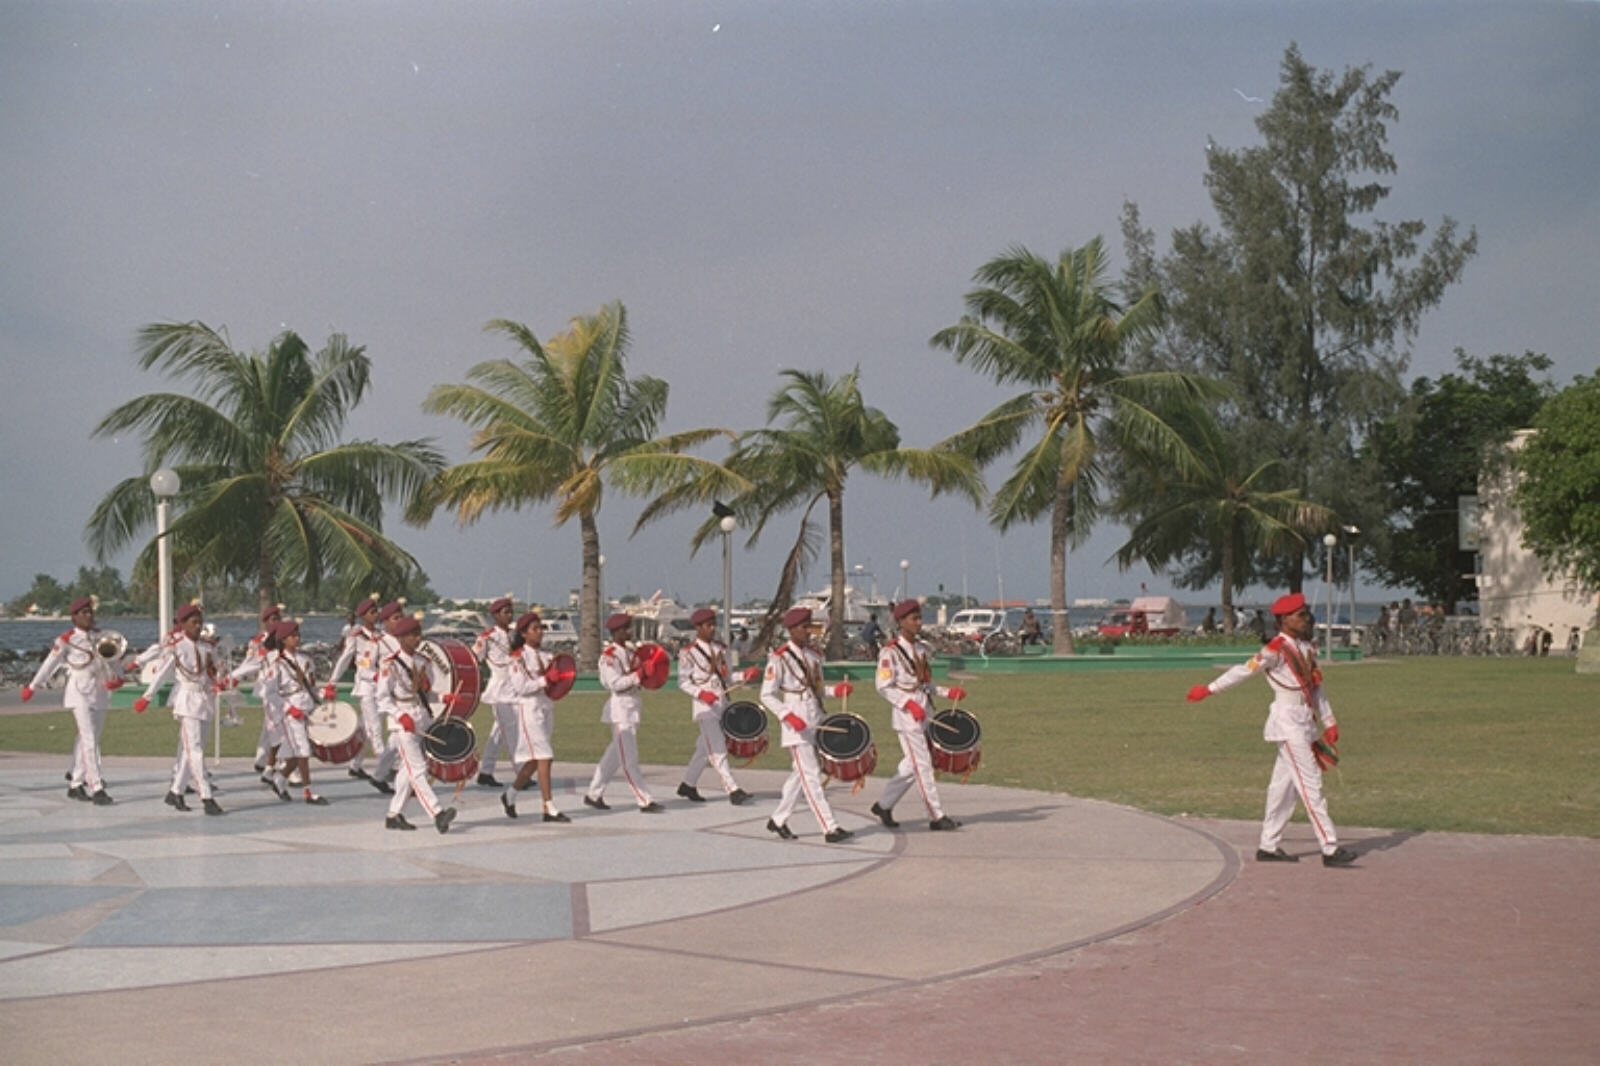 A marching band in the central park, Mal, Maldives